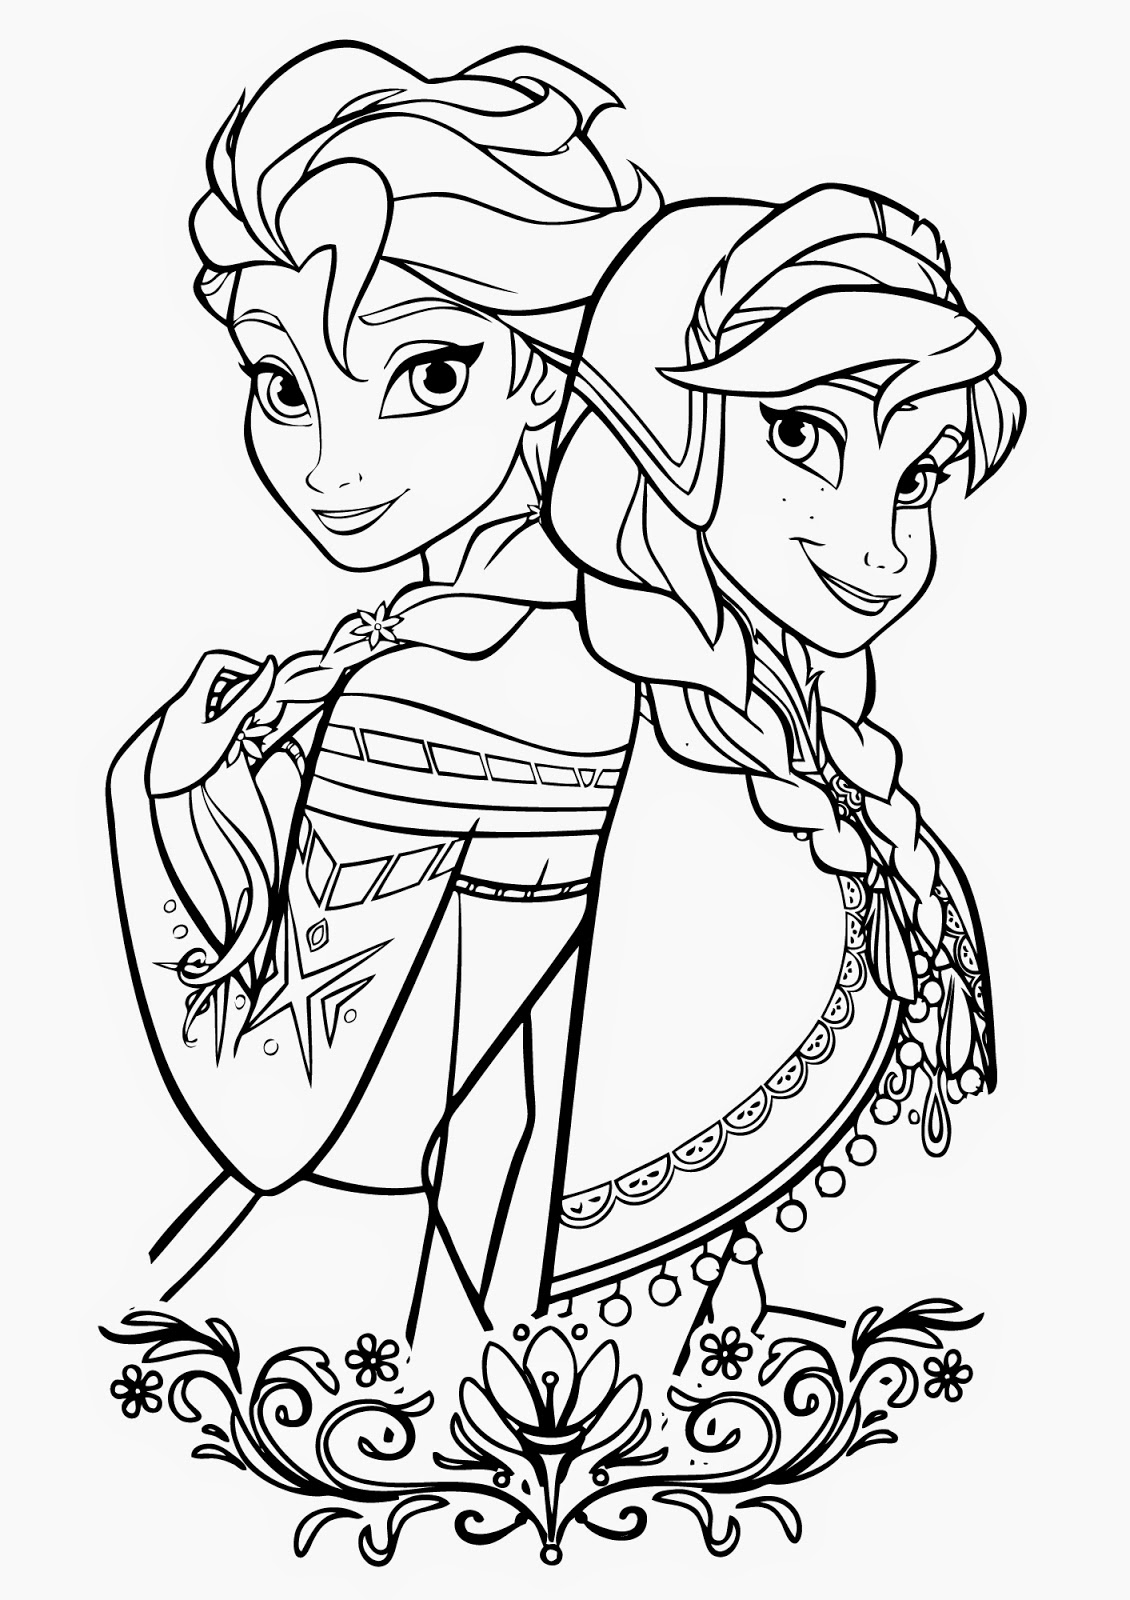 Disney Frozen Free Printable Coloring Pages Free Printable Templates